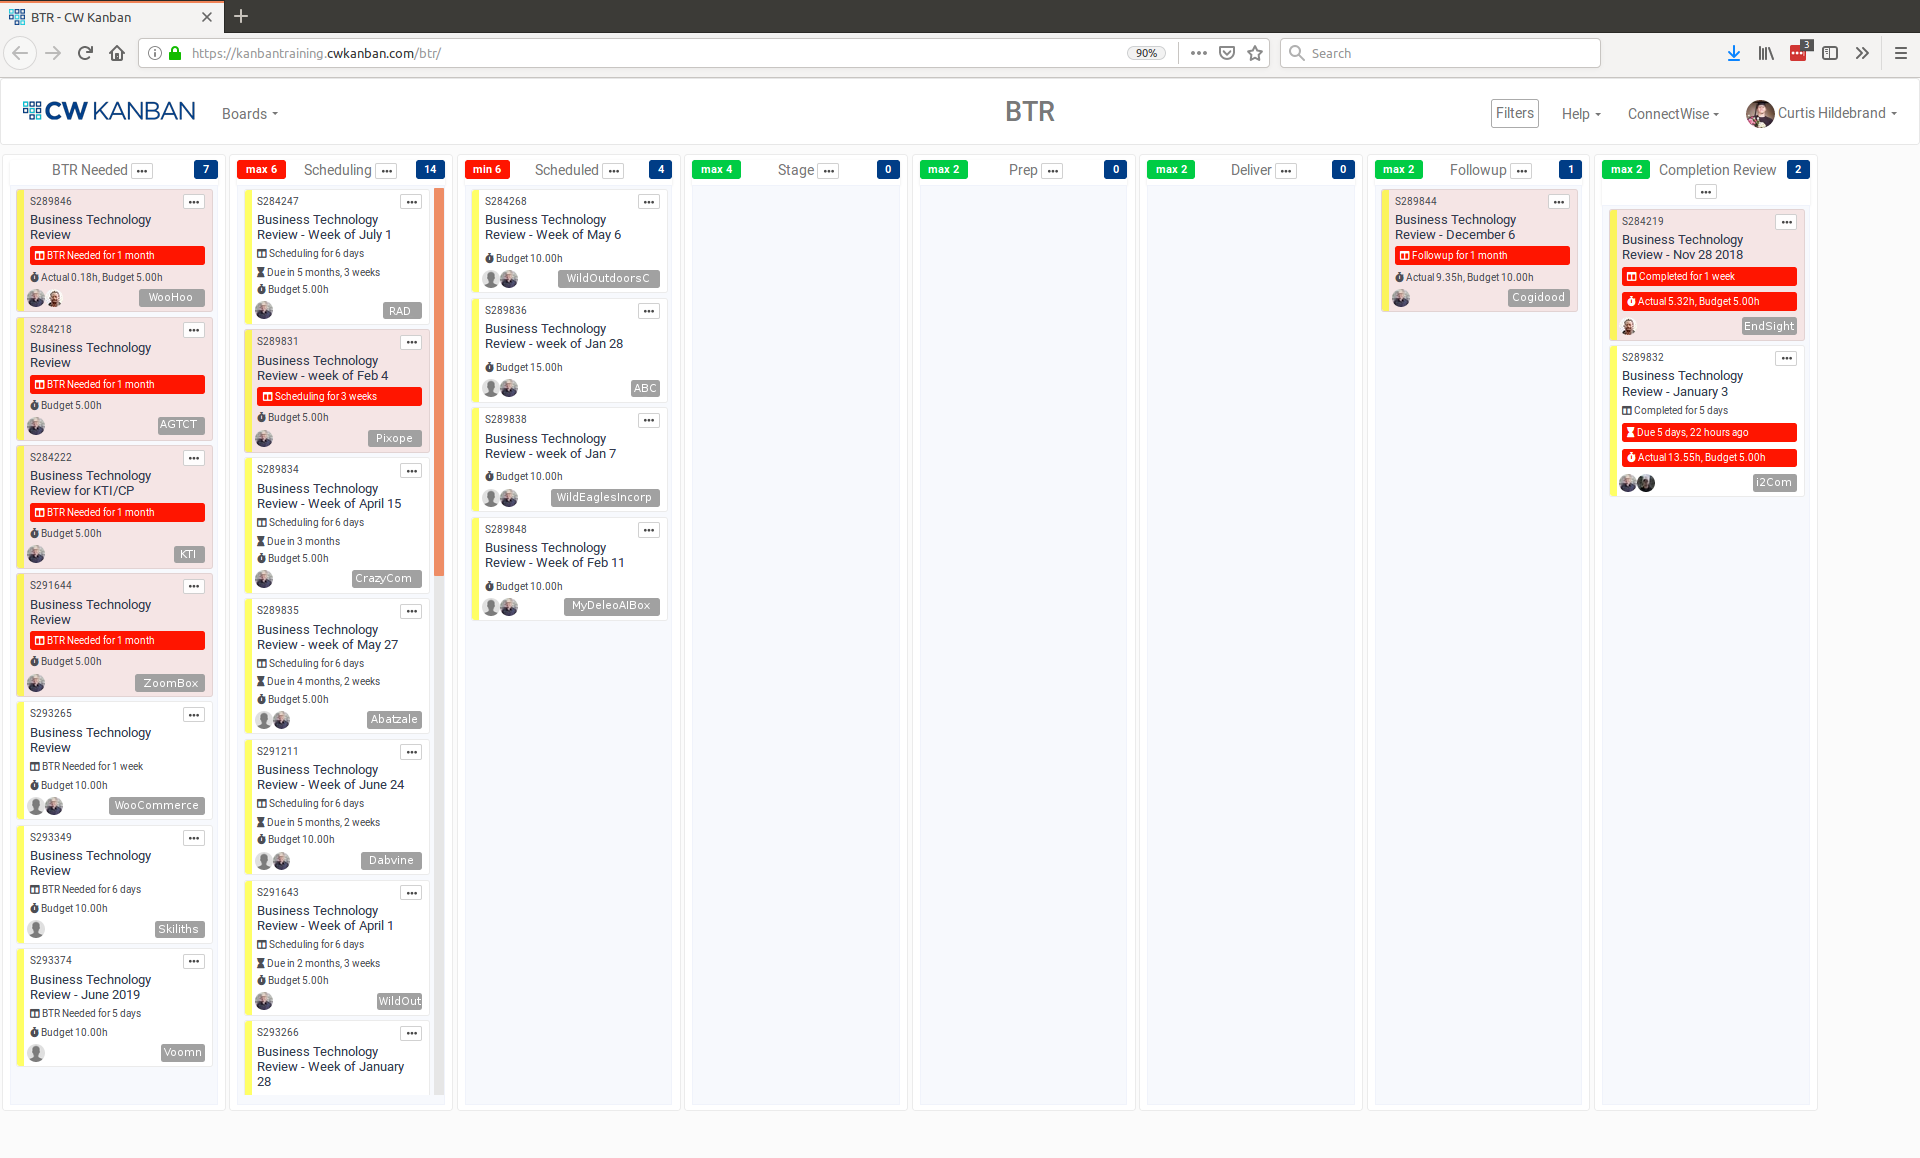 Building a Lean QBR Process with ConnectWise and Kanban